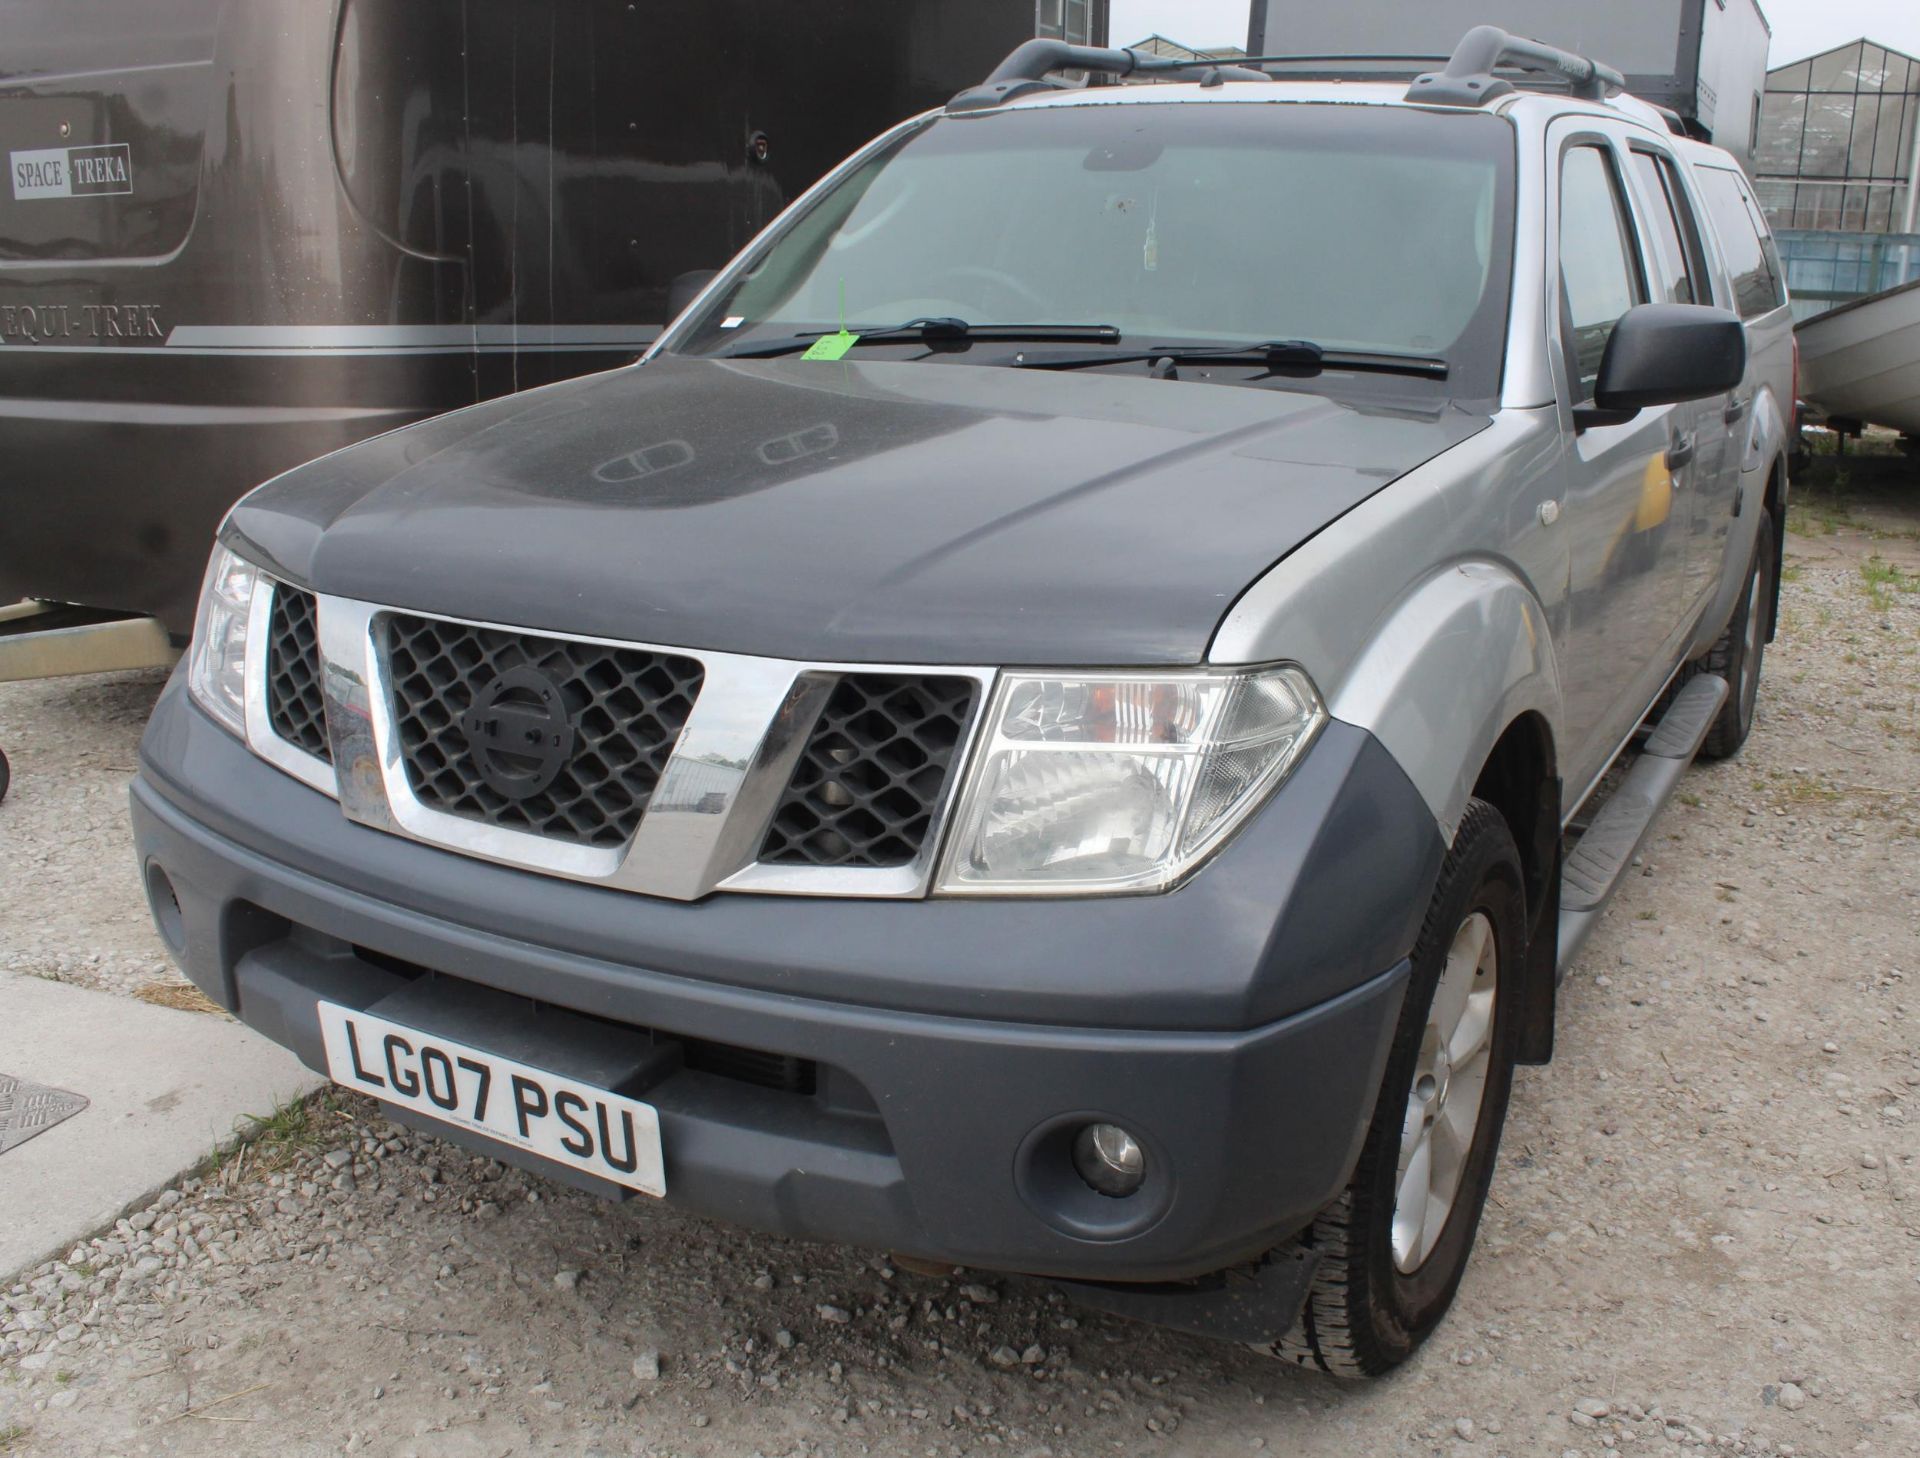 A SILVER 2007 NISSAN NAVARA AUTO MATIC PICKUP, WITH DIESEL ENGINE AND AUTOMATIC TRANSITION, - Image 2 of 3